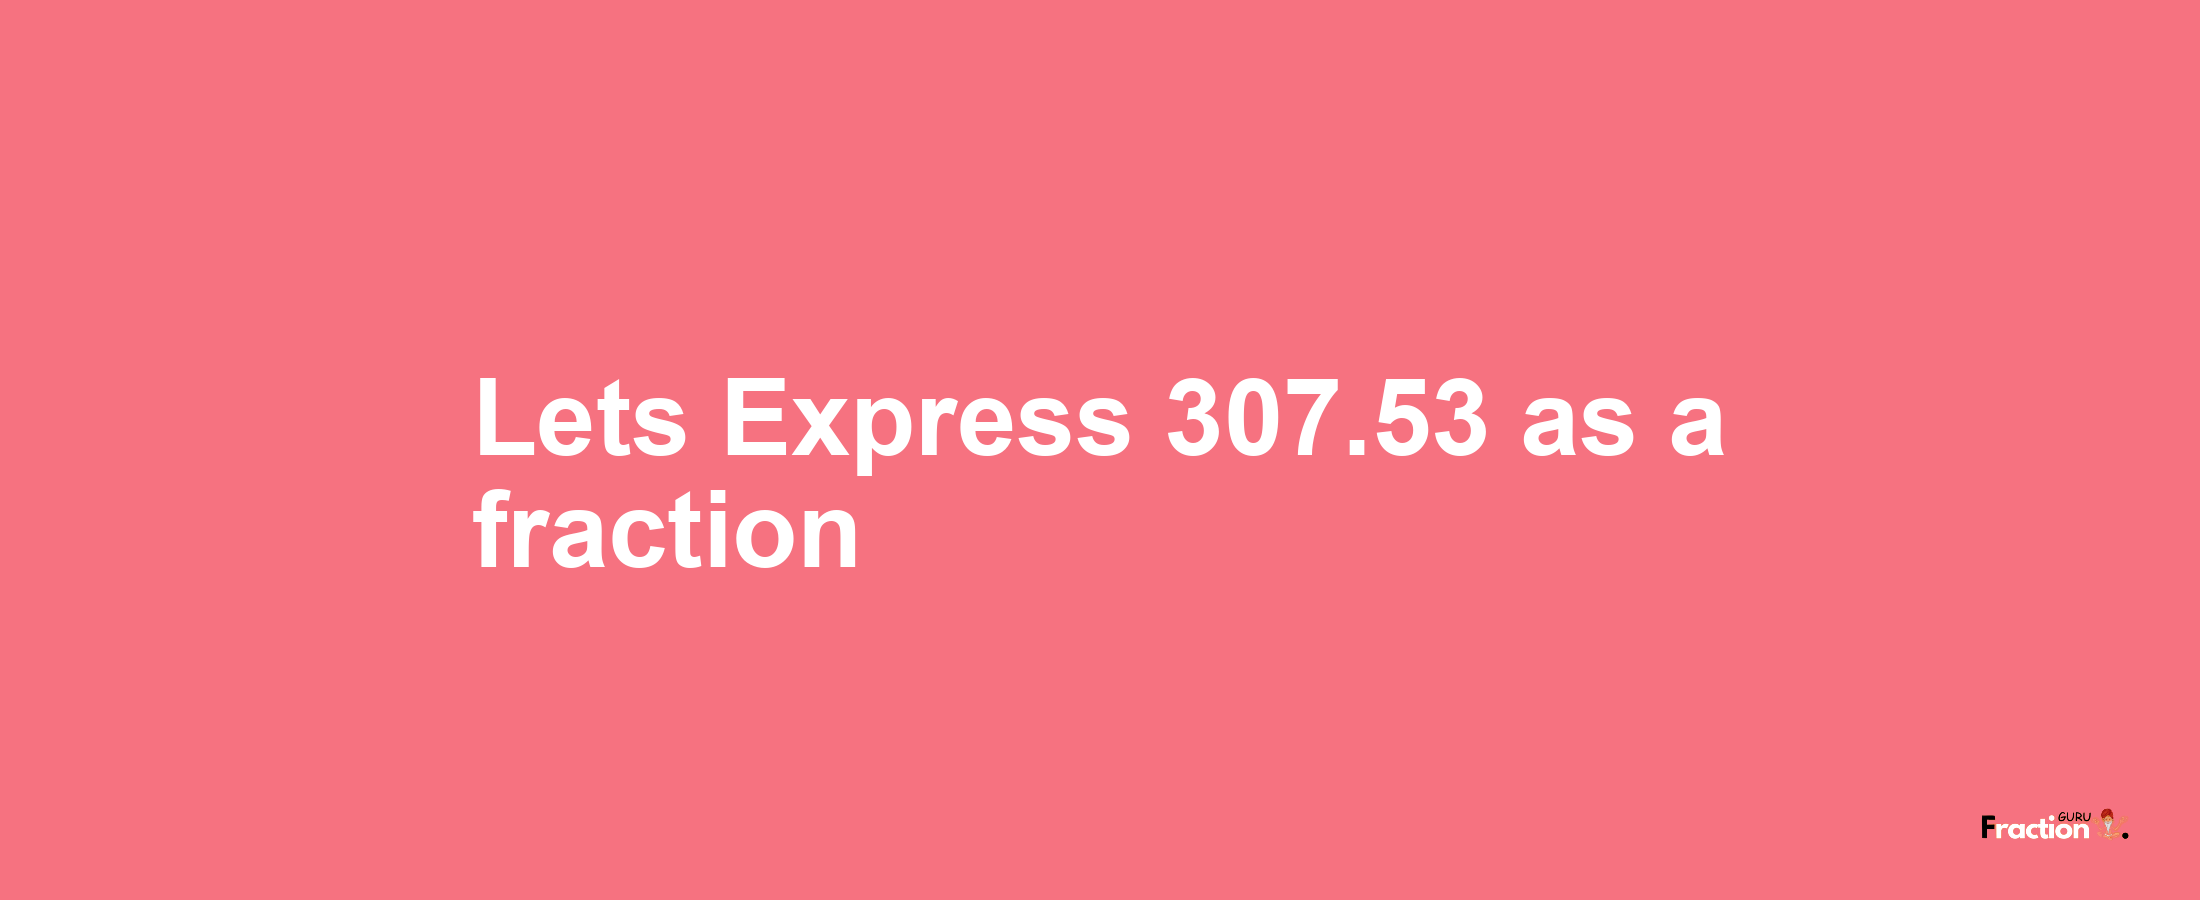 Lets Express 307.53 as afraction